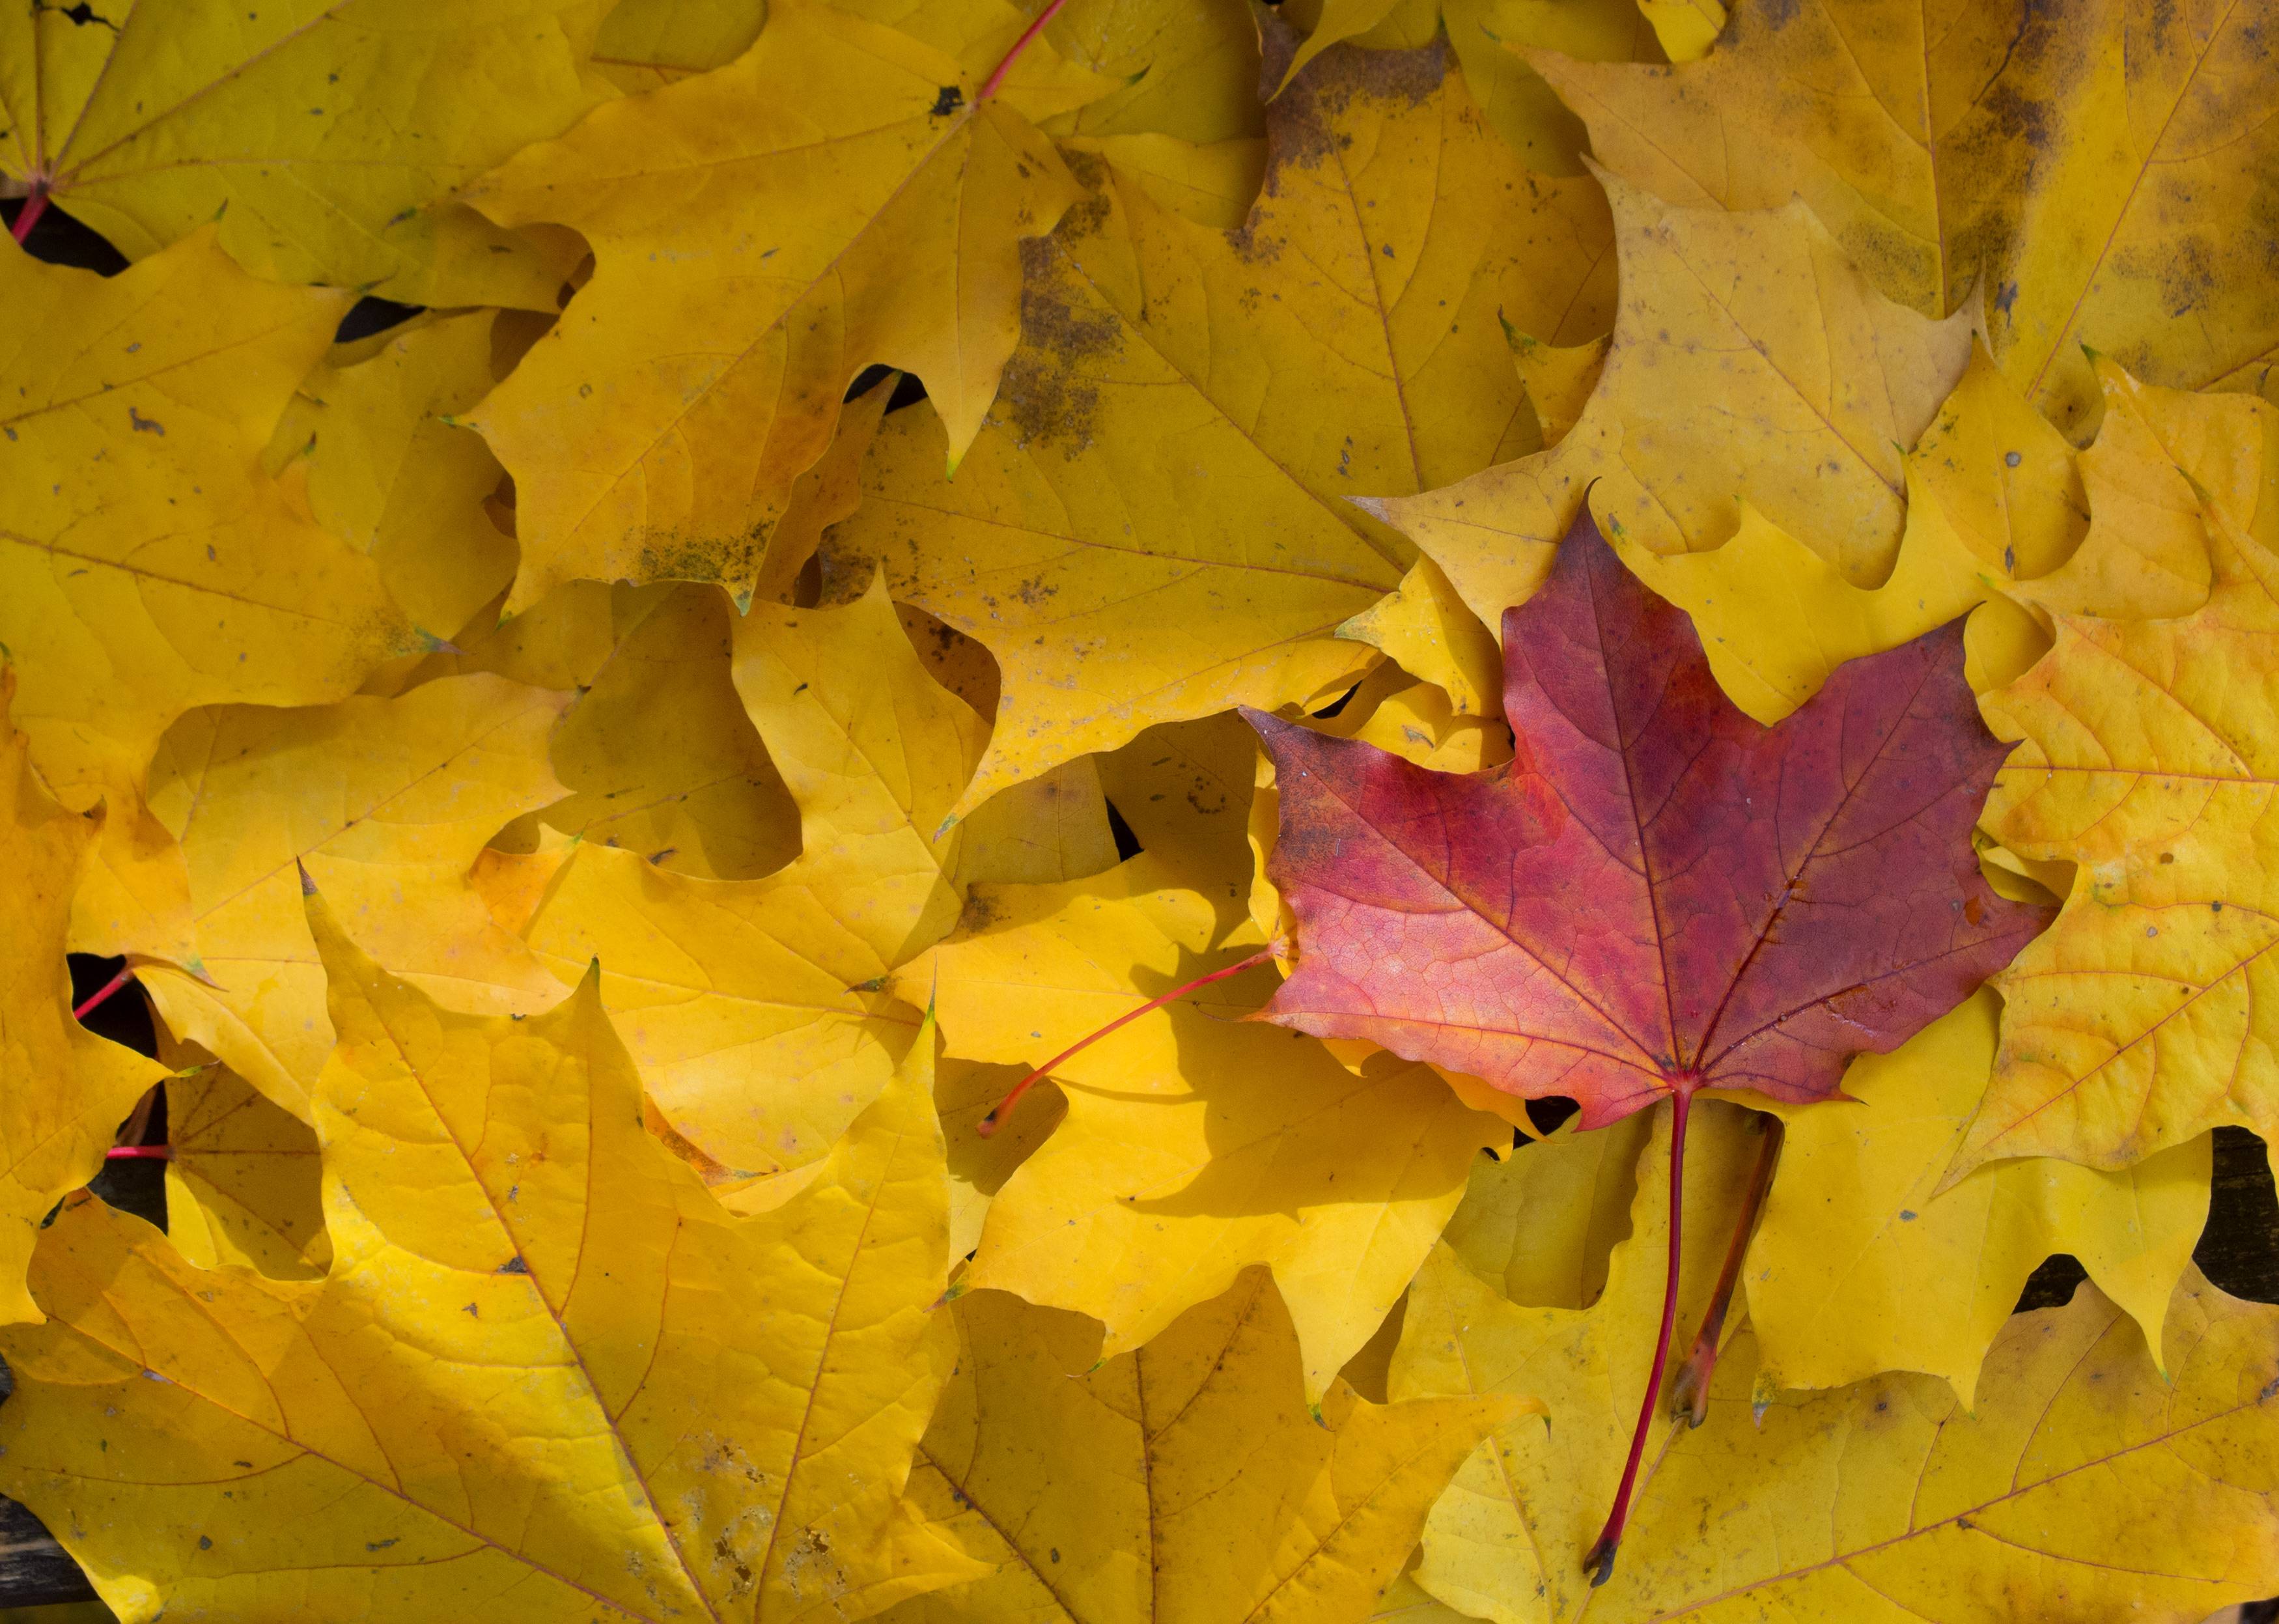 Red Leaf Yellow Logo - FREE IMAGE: Red Leaf Between Yellow Leaves In Fall | Libreshot ...